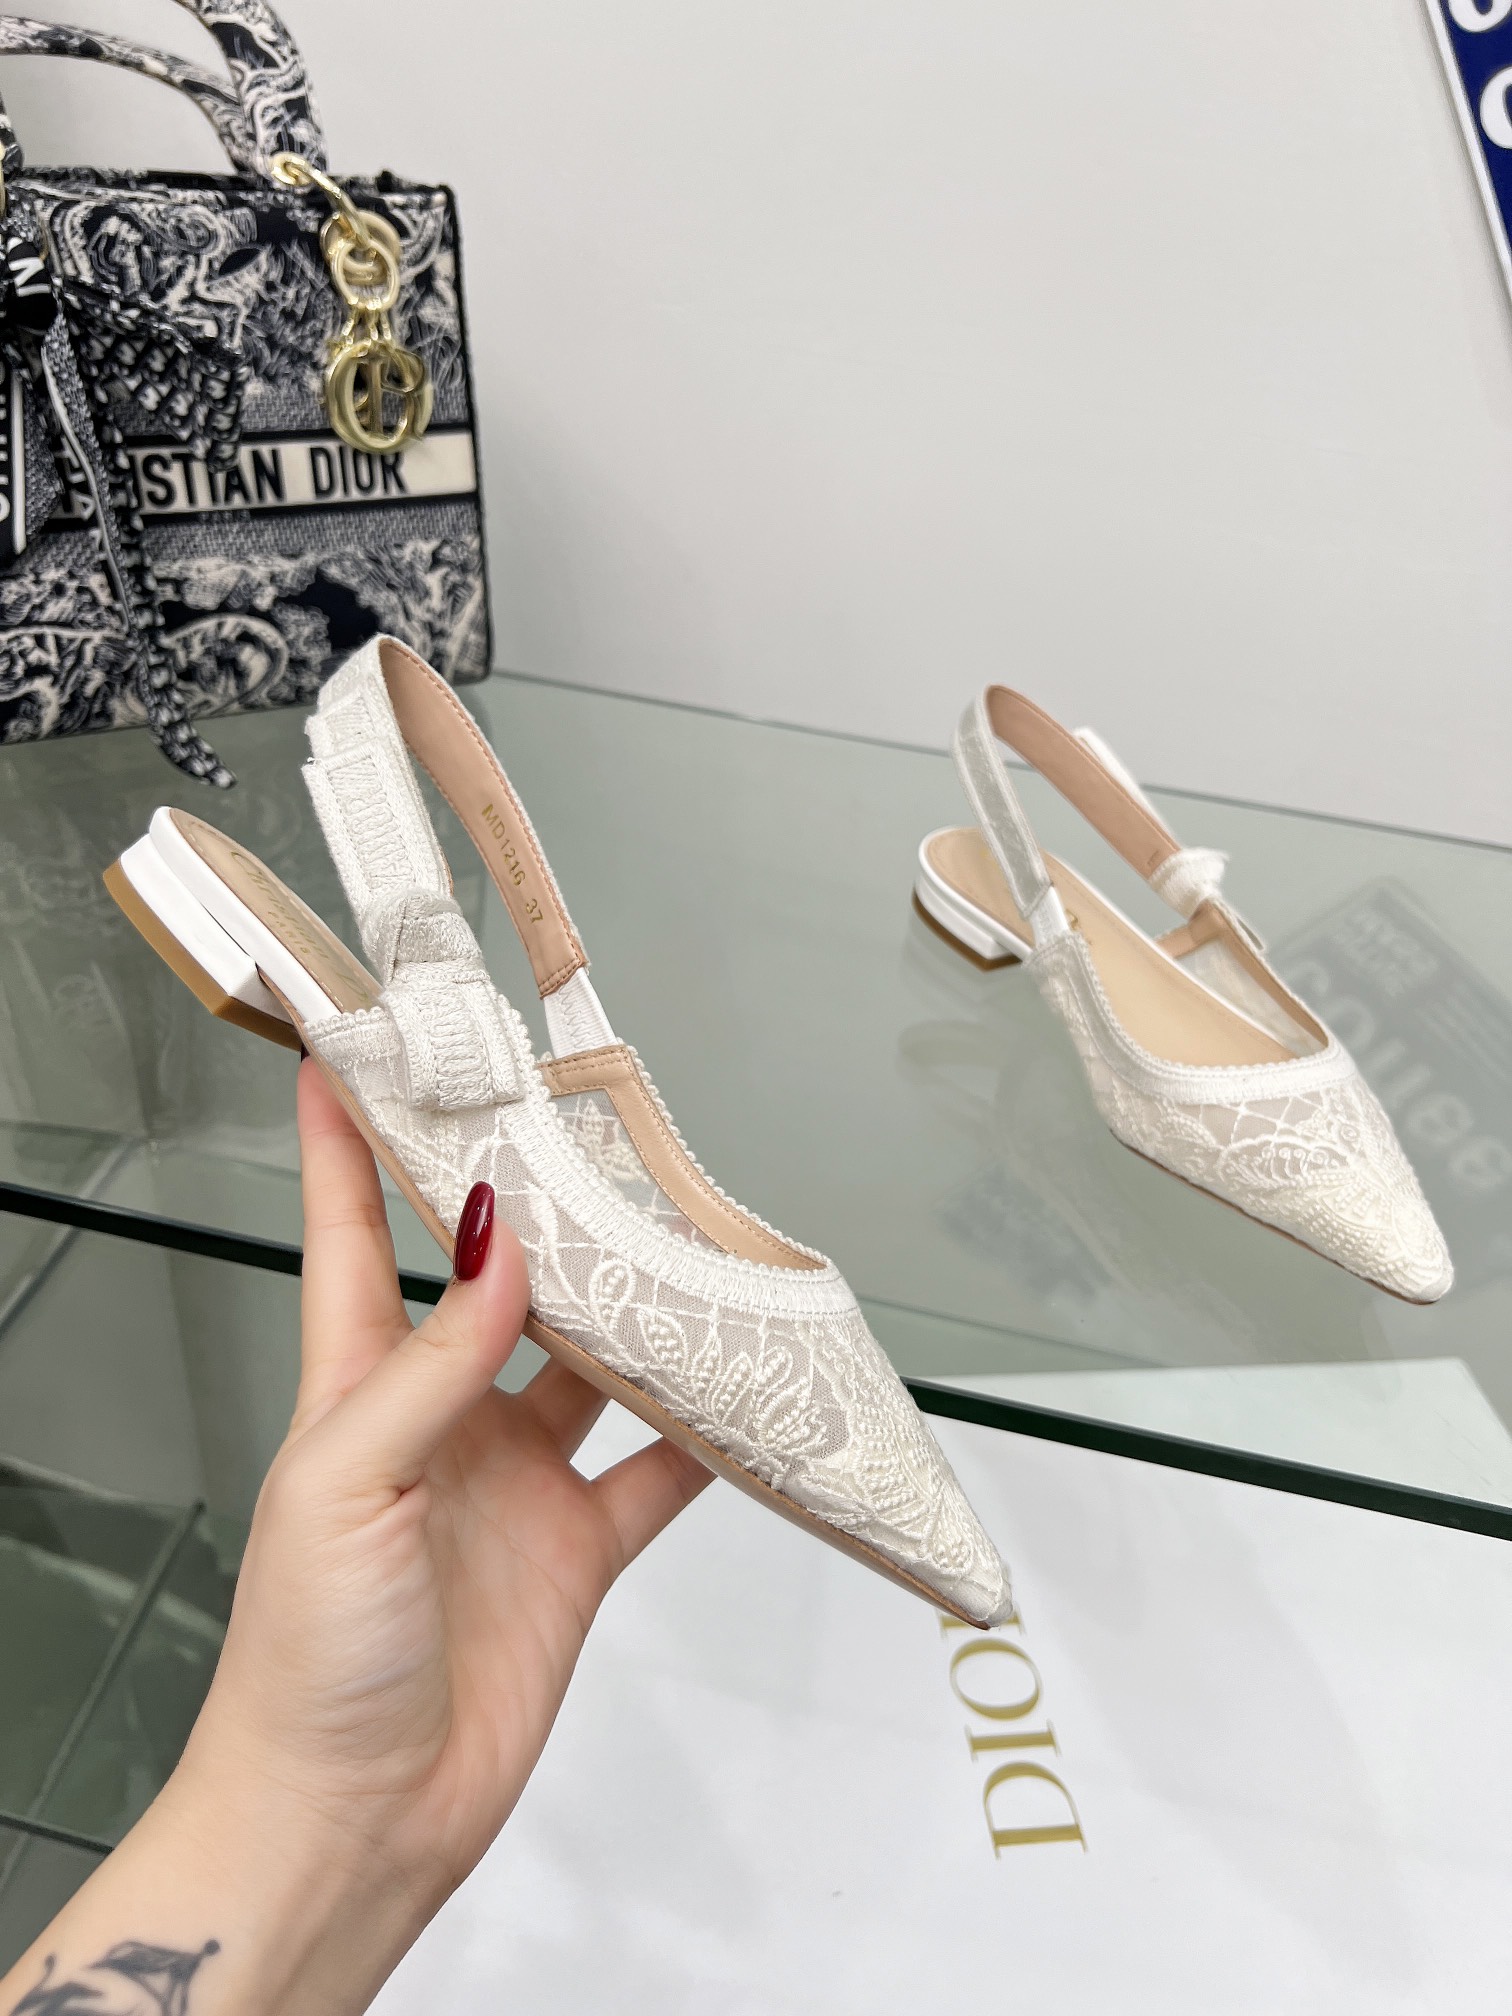 Dior Shoes High Heel Pumps Embroidery Genuine Leather Sheepskin Spring/Summer Collection